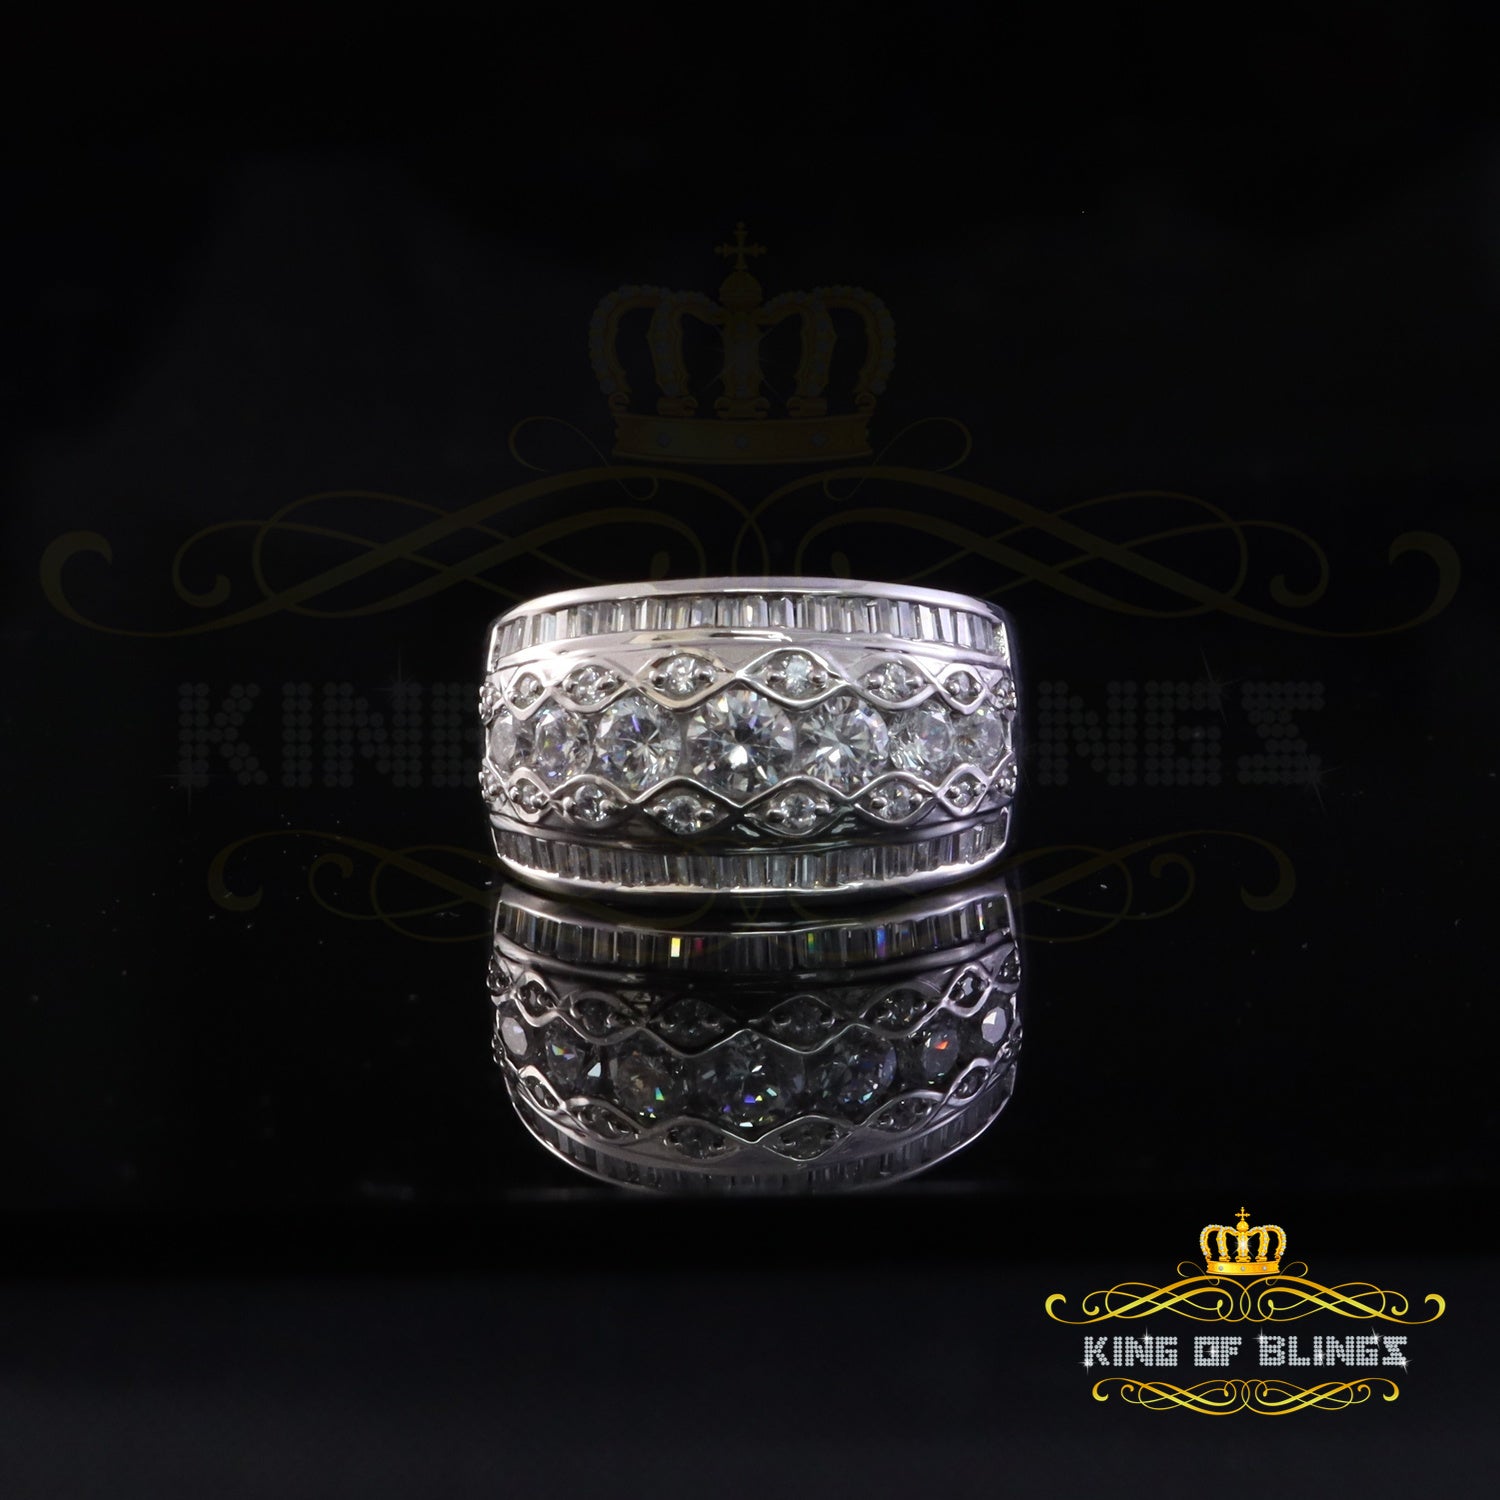 King Of Bling'sWhite Silver 3.50ct Cubic Zirconia Round Men's Adjustable Ring From SZ 9 to 11 KING OF BLINGS